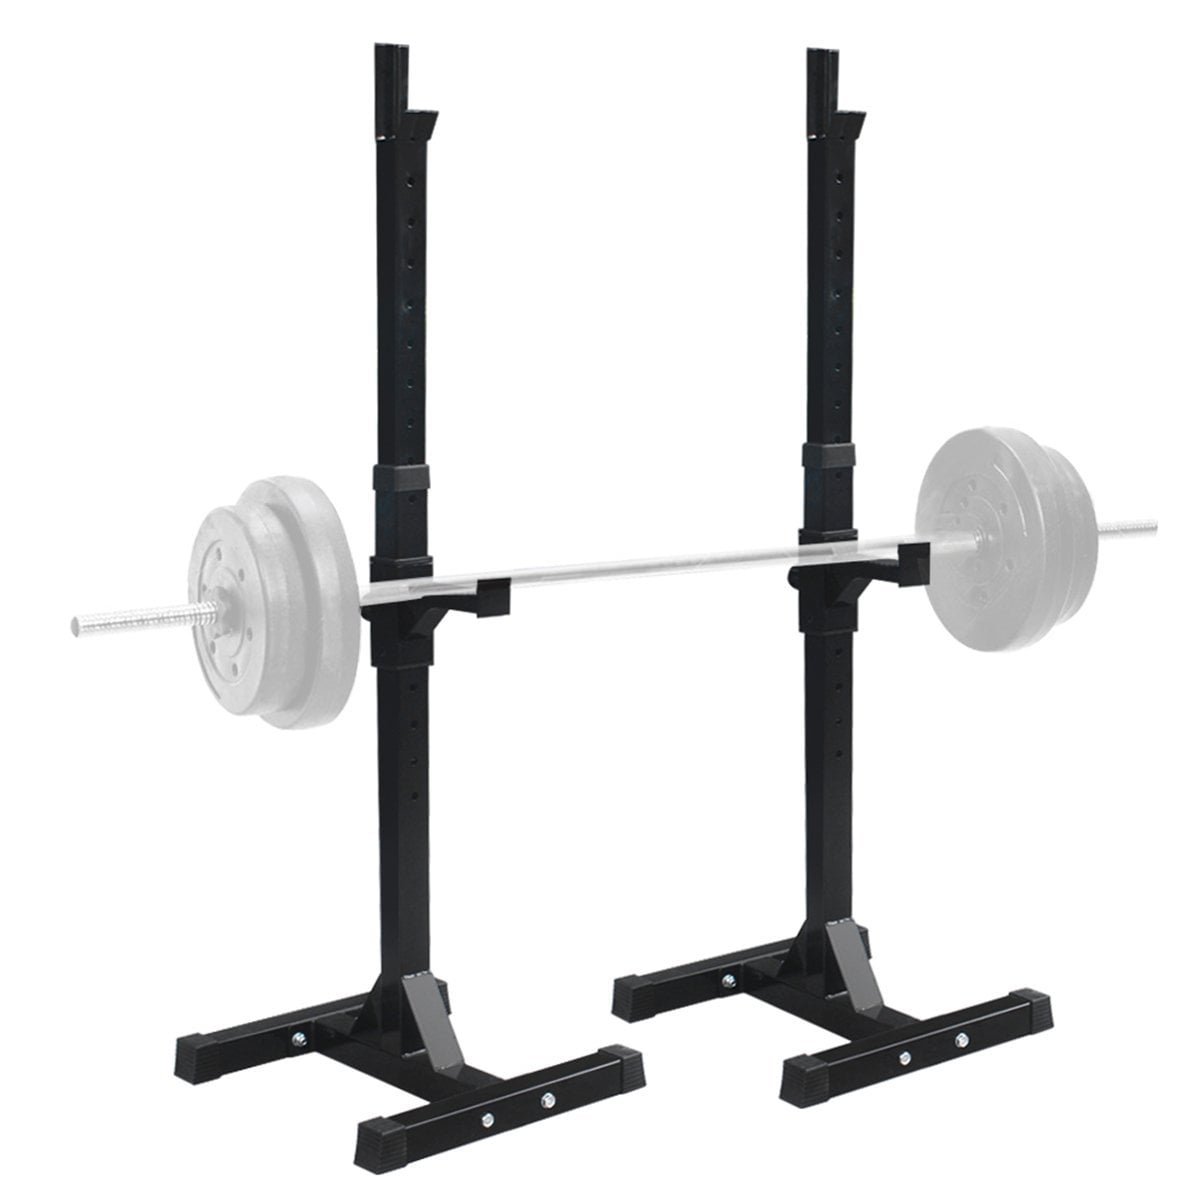 Details about   Squat Rack Bench Press Power Adjustable Weight Rack Barbell Stand Gym Home USA 